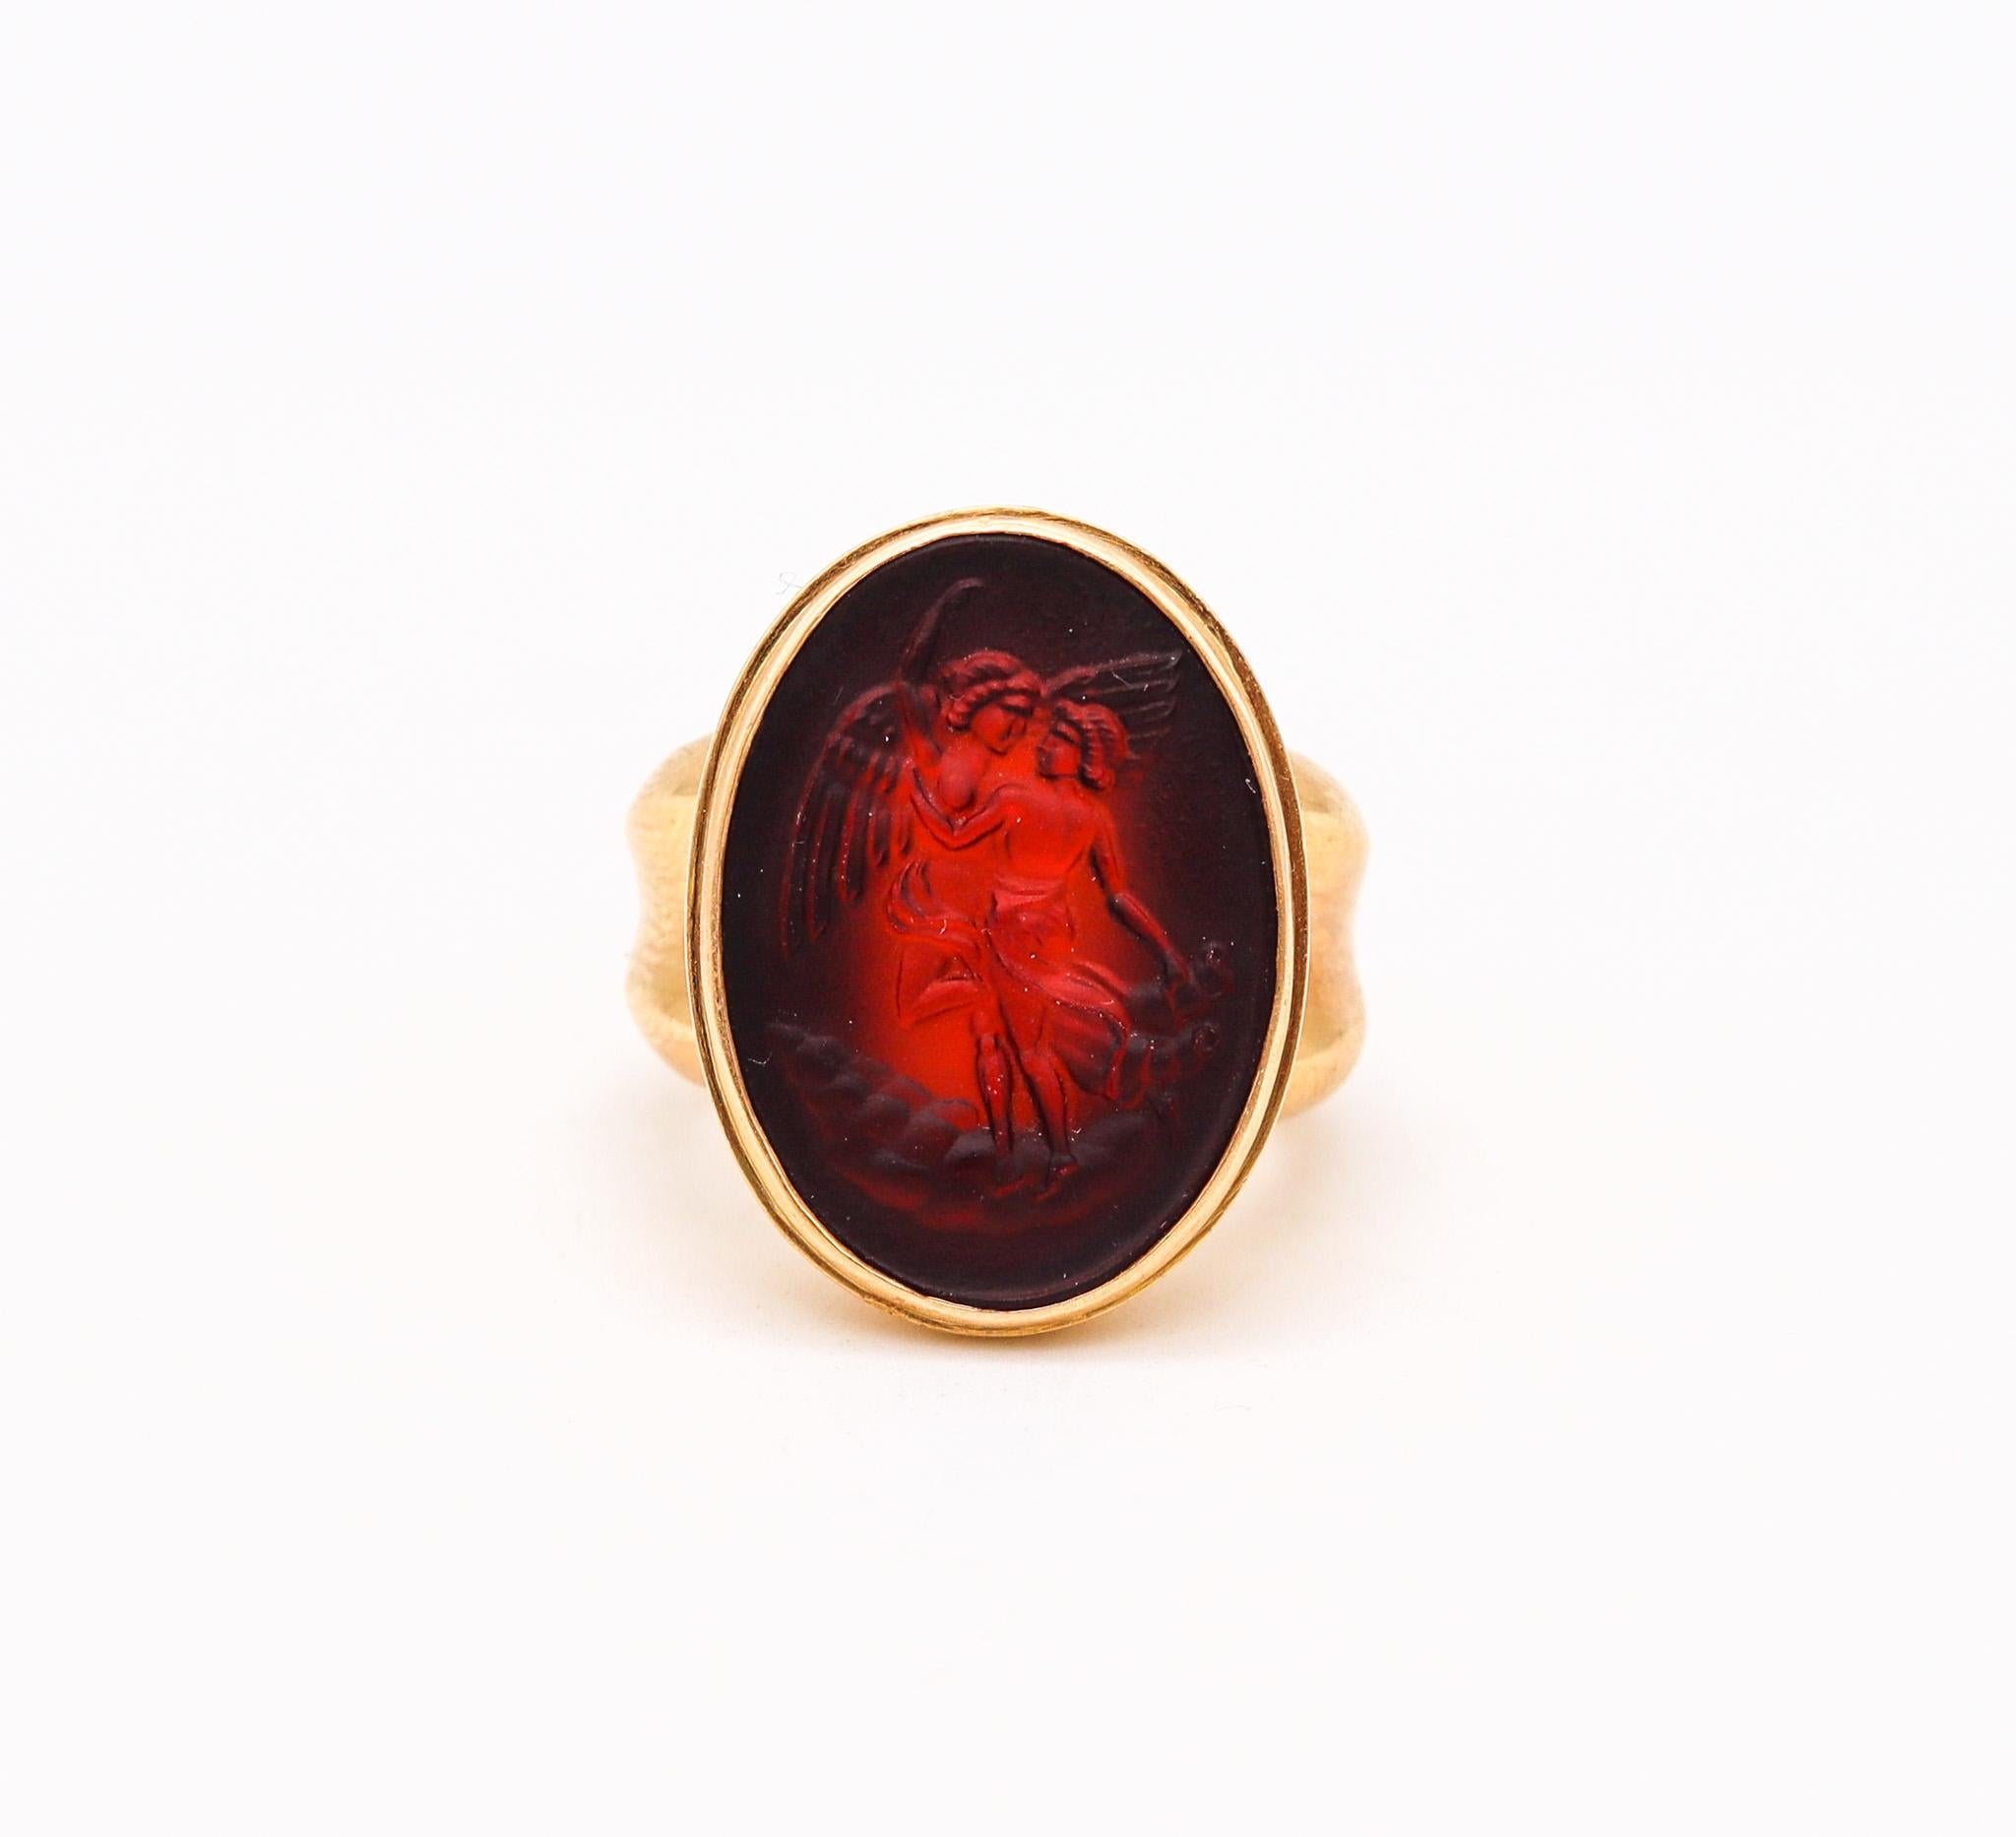 Signet ring with carnelian.

Gorgeous statement signet ring, crafted in Europe in solid yellow gold of 18 karats with high polished finish. Designed in the ancient style with very bold look and exhibiting great eye appeal. The craftsmanship is